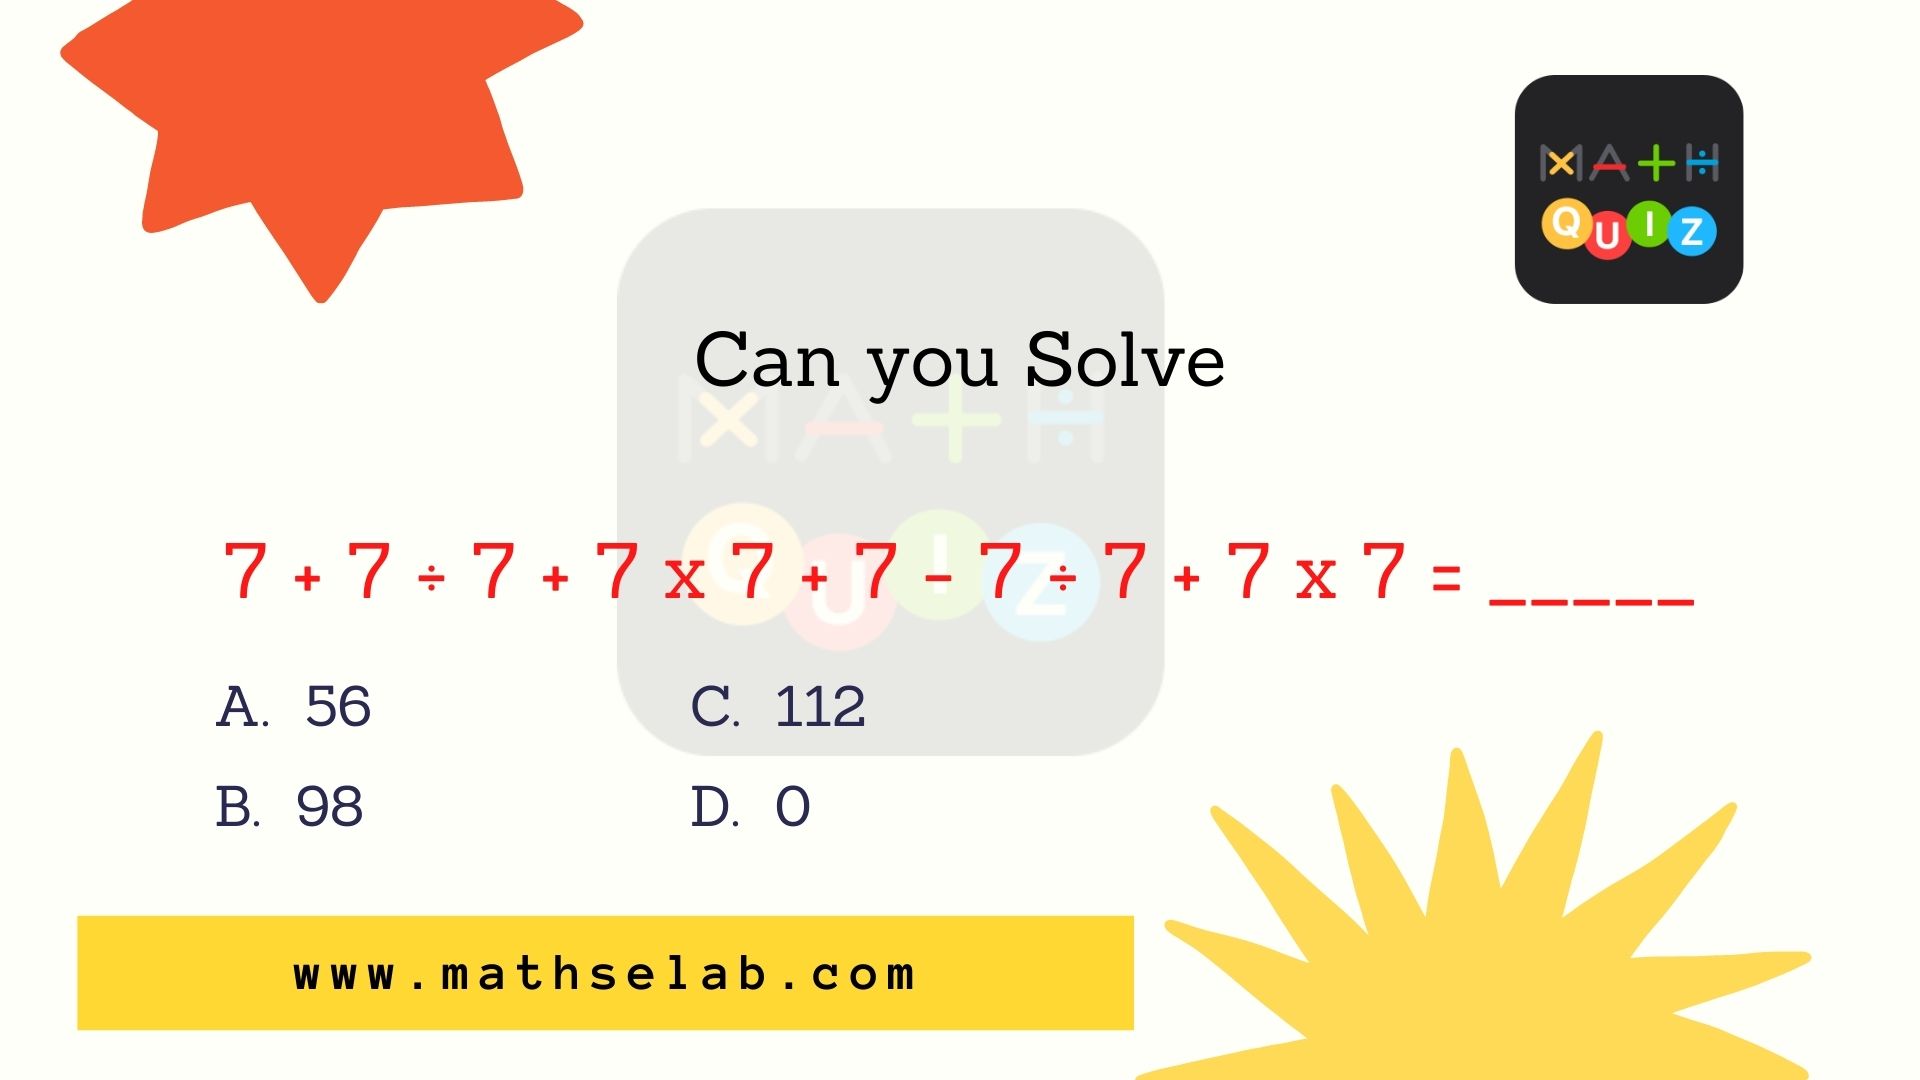 Can you Solve 7 + 7 ÷ 7 + 7 x 7 + 7 − 7 ÷ 7 + 7 x 7 = ____